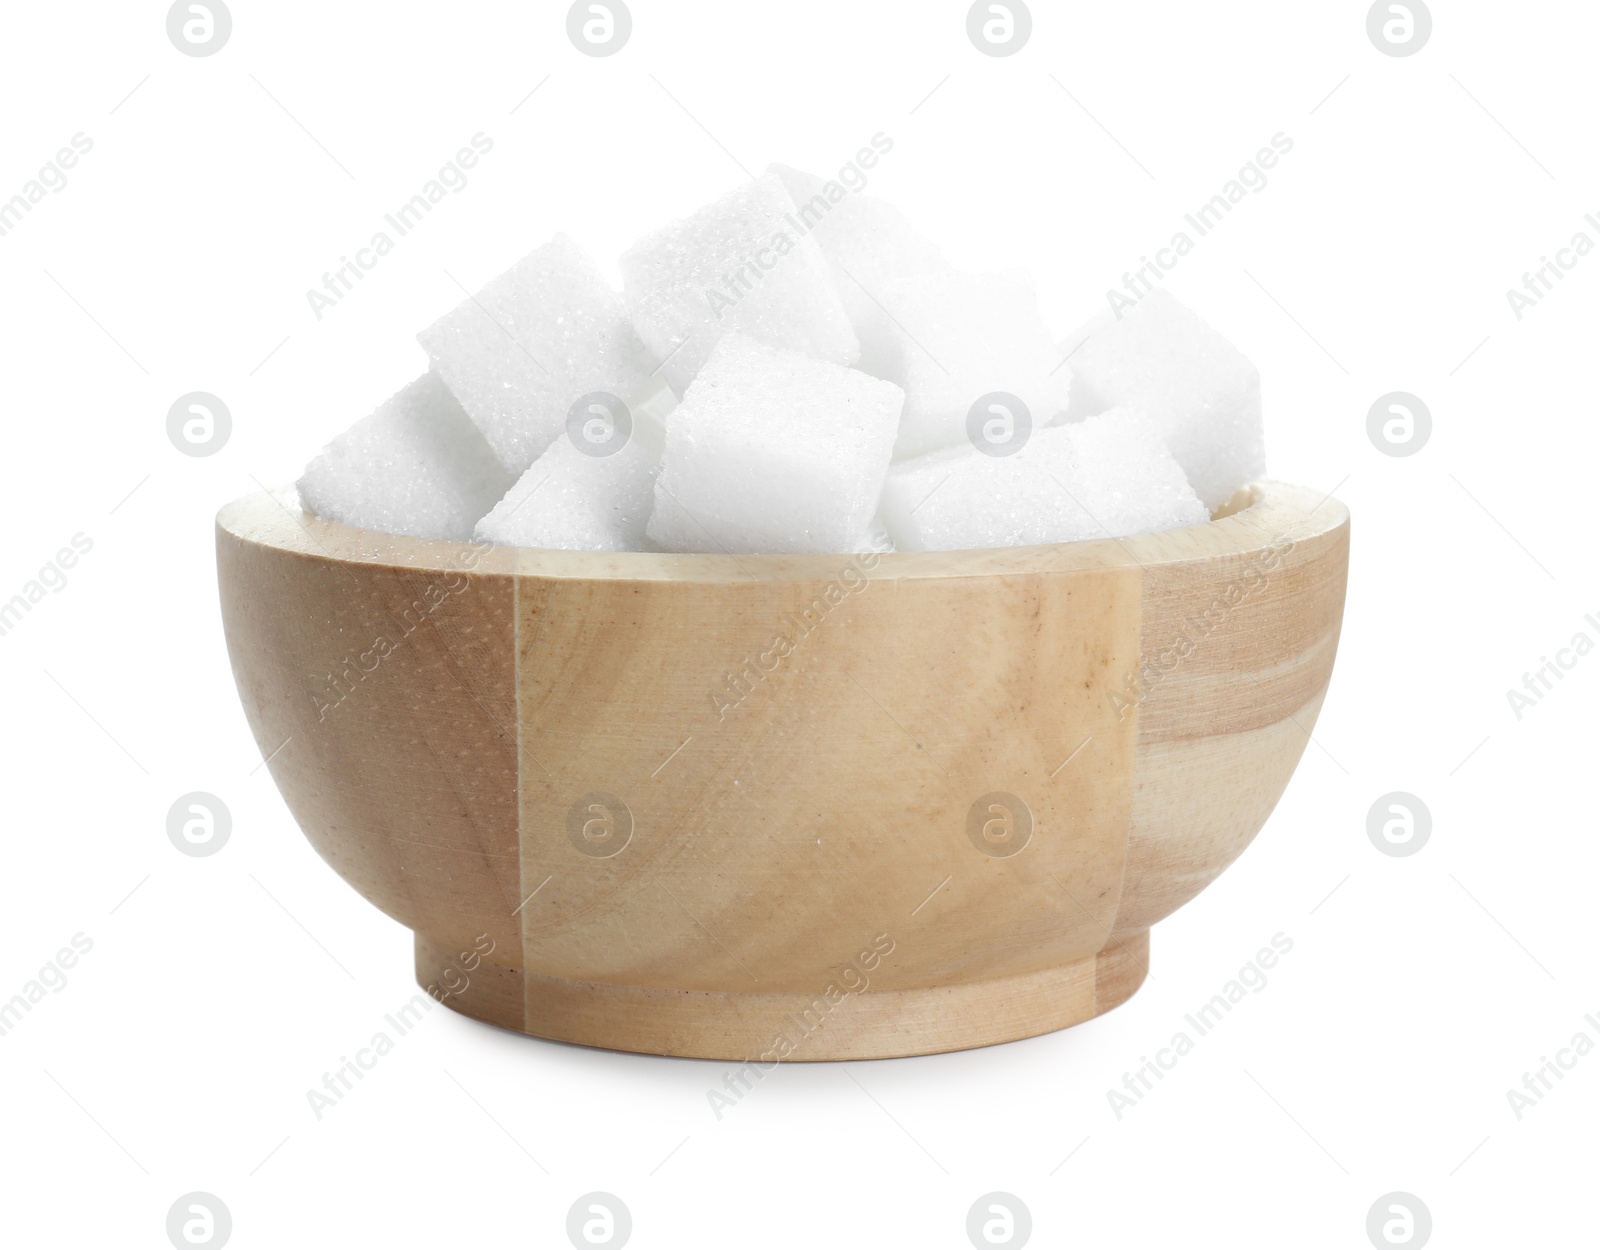 Photo of Sugar cubes in wooden bowl isolated on white